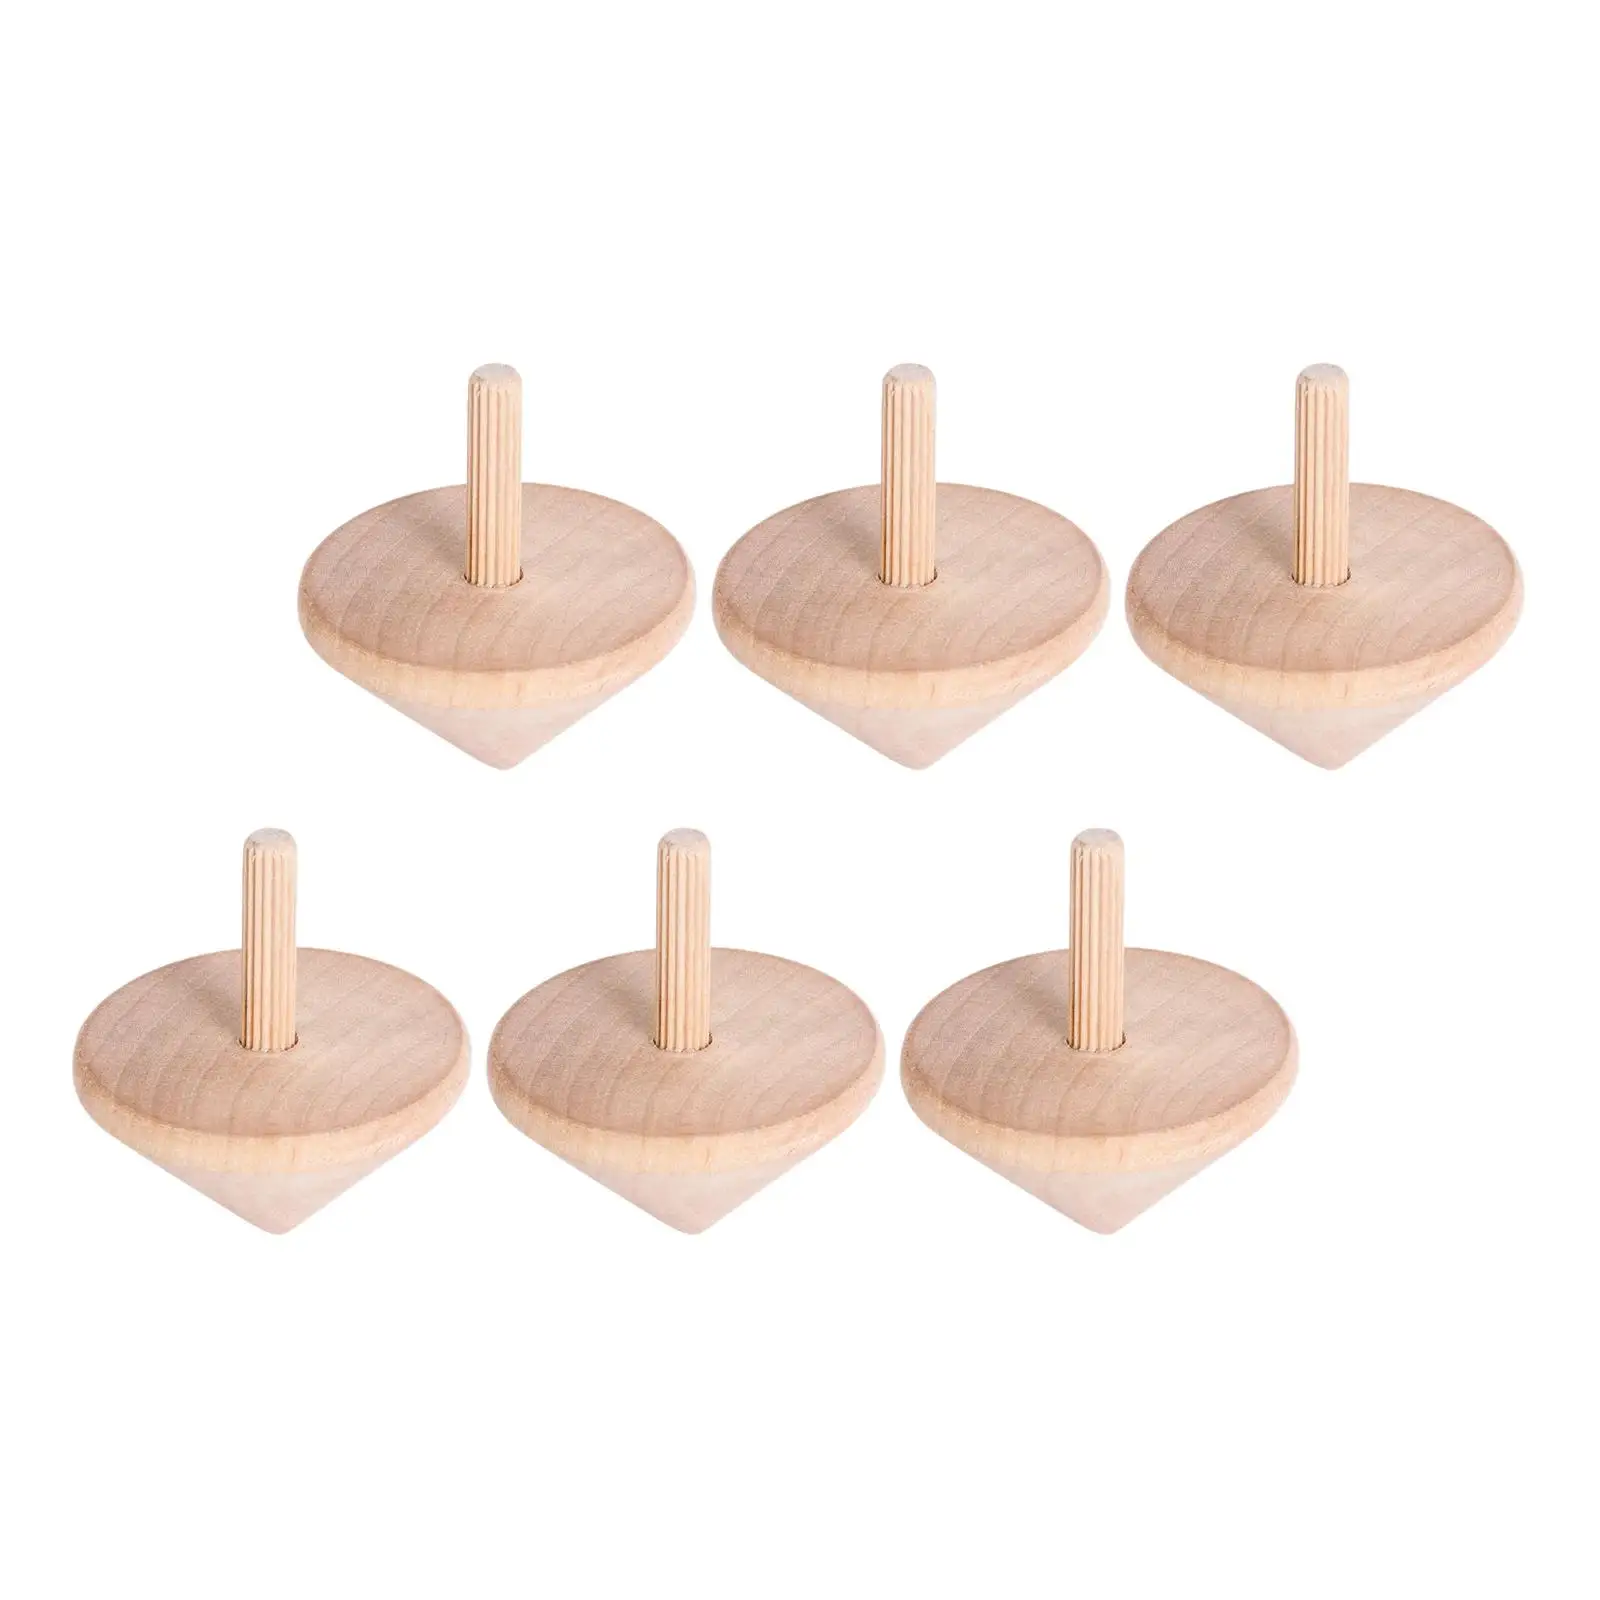 6x Unpainted Wood Blank Tops Paint Your Own Wooden Toys Kindergarten Int... - £7.06 GBP